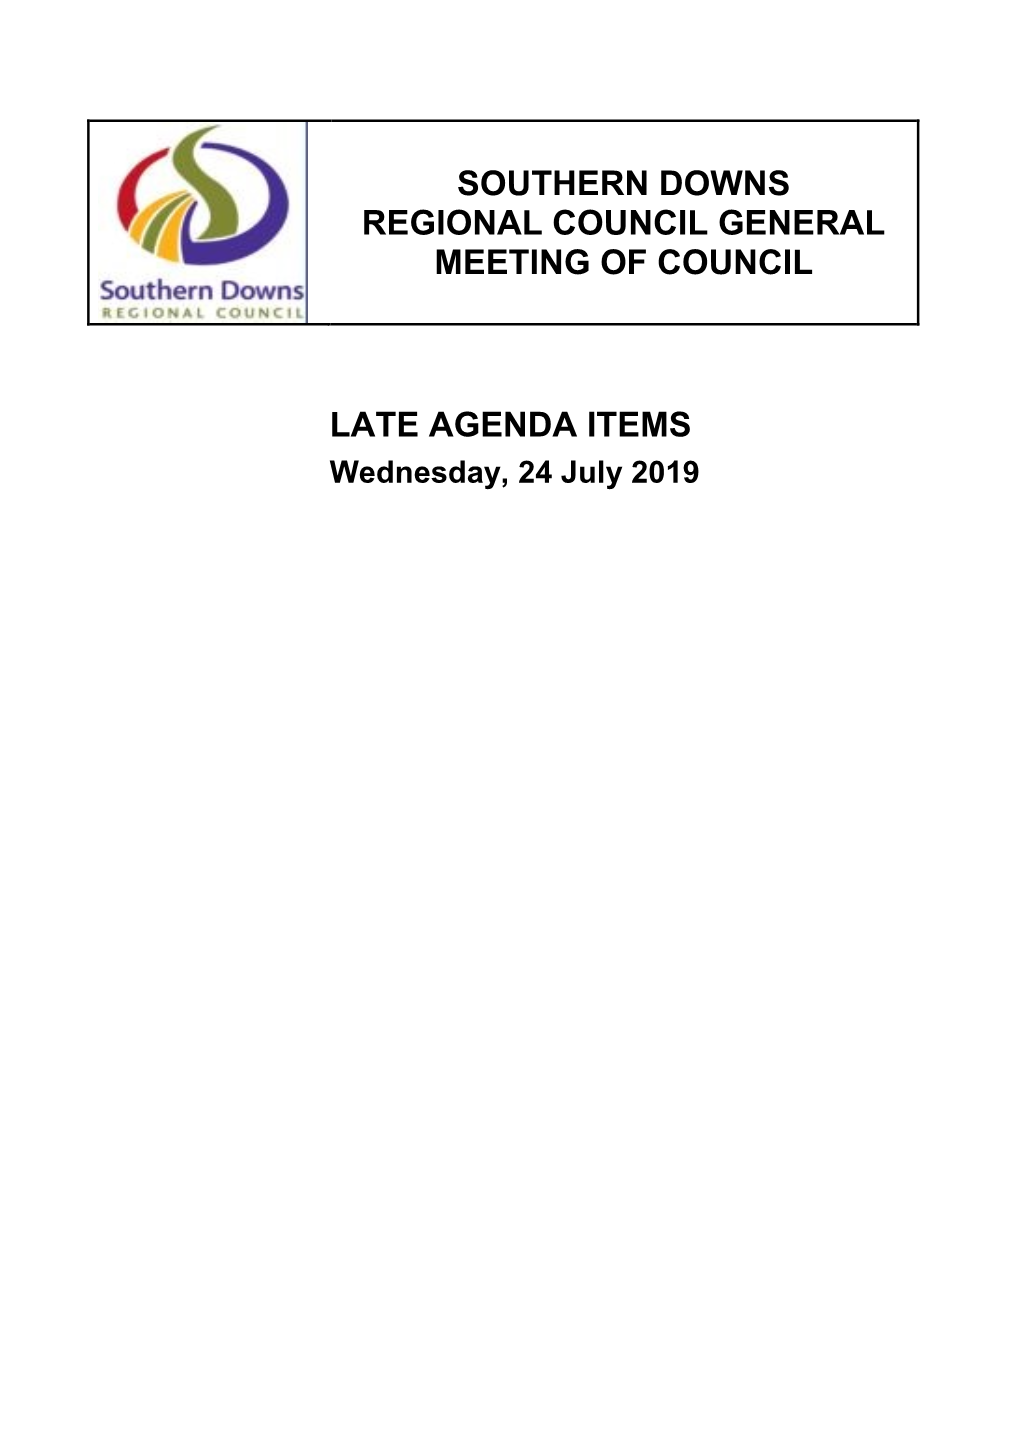 Late Items Agenda of General Council Meeting